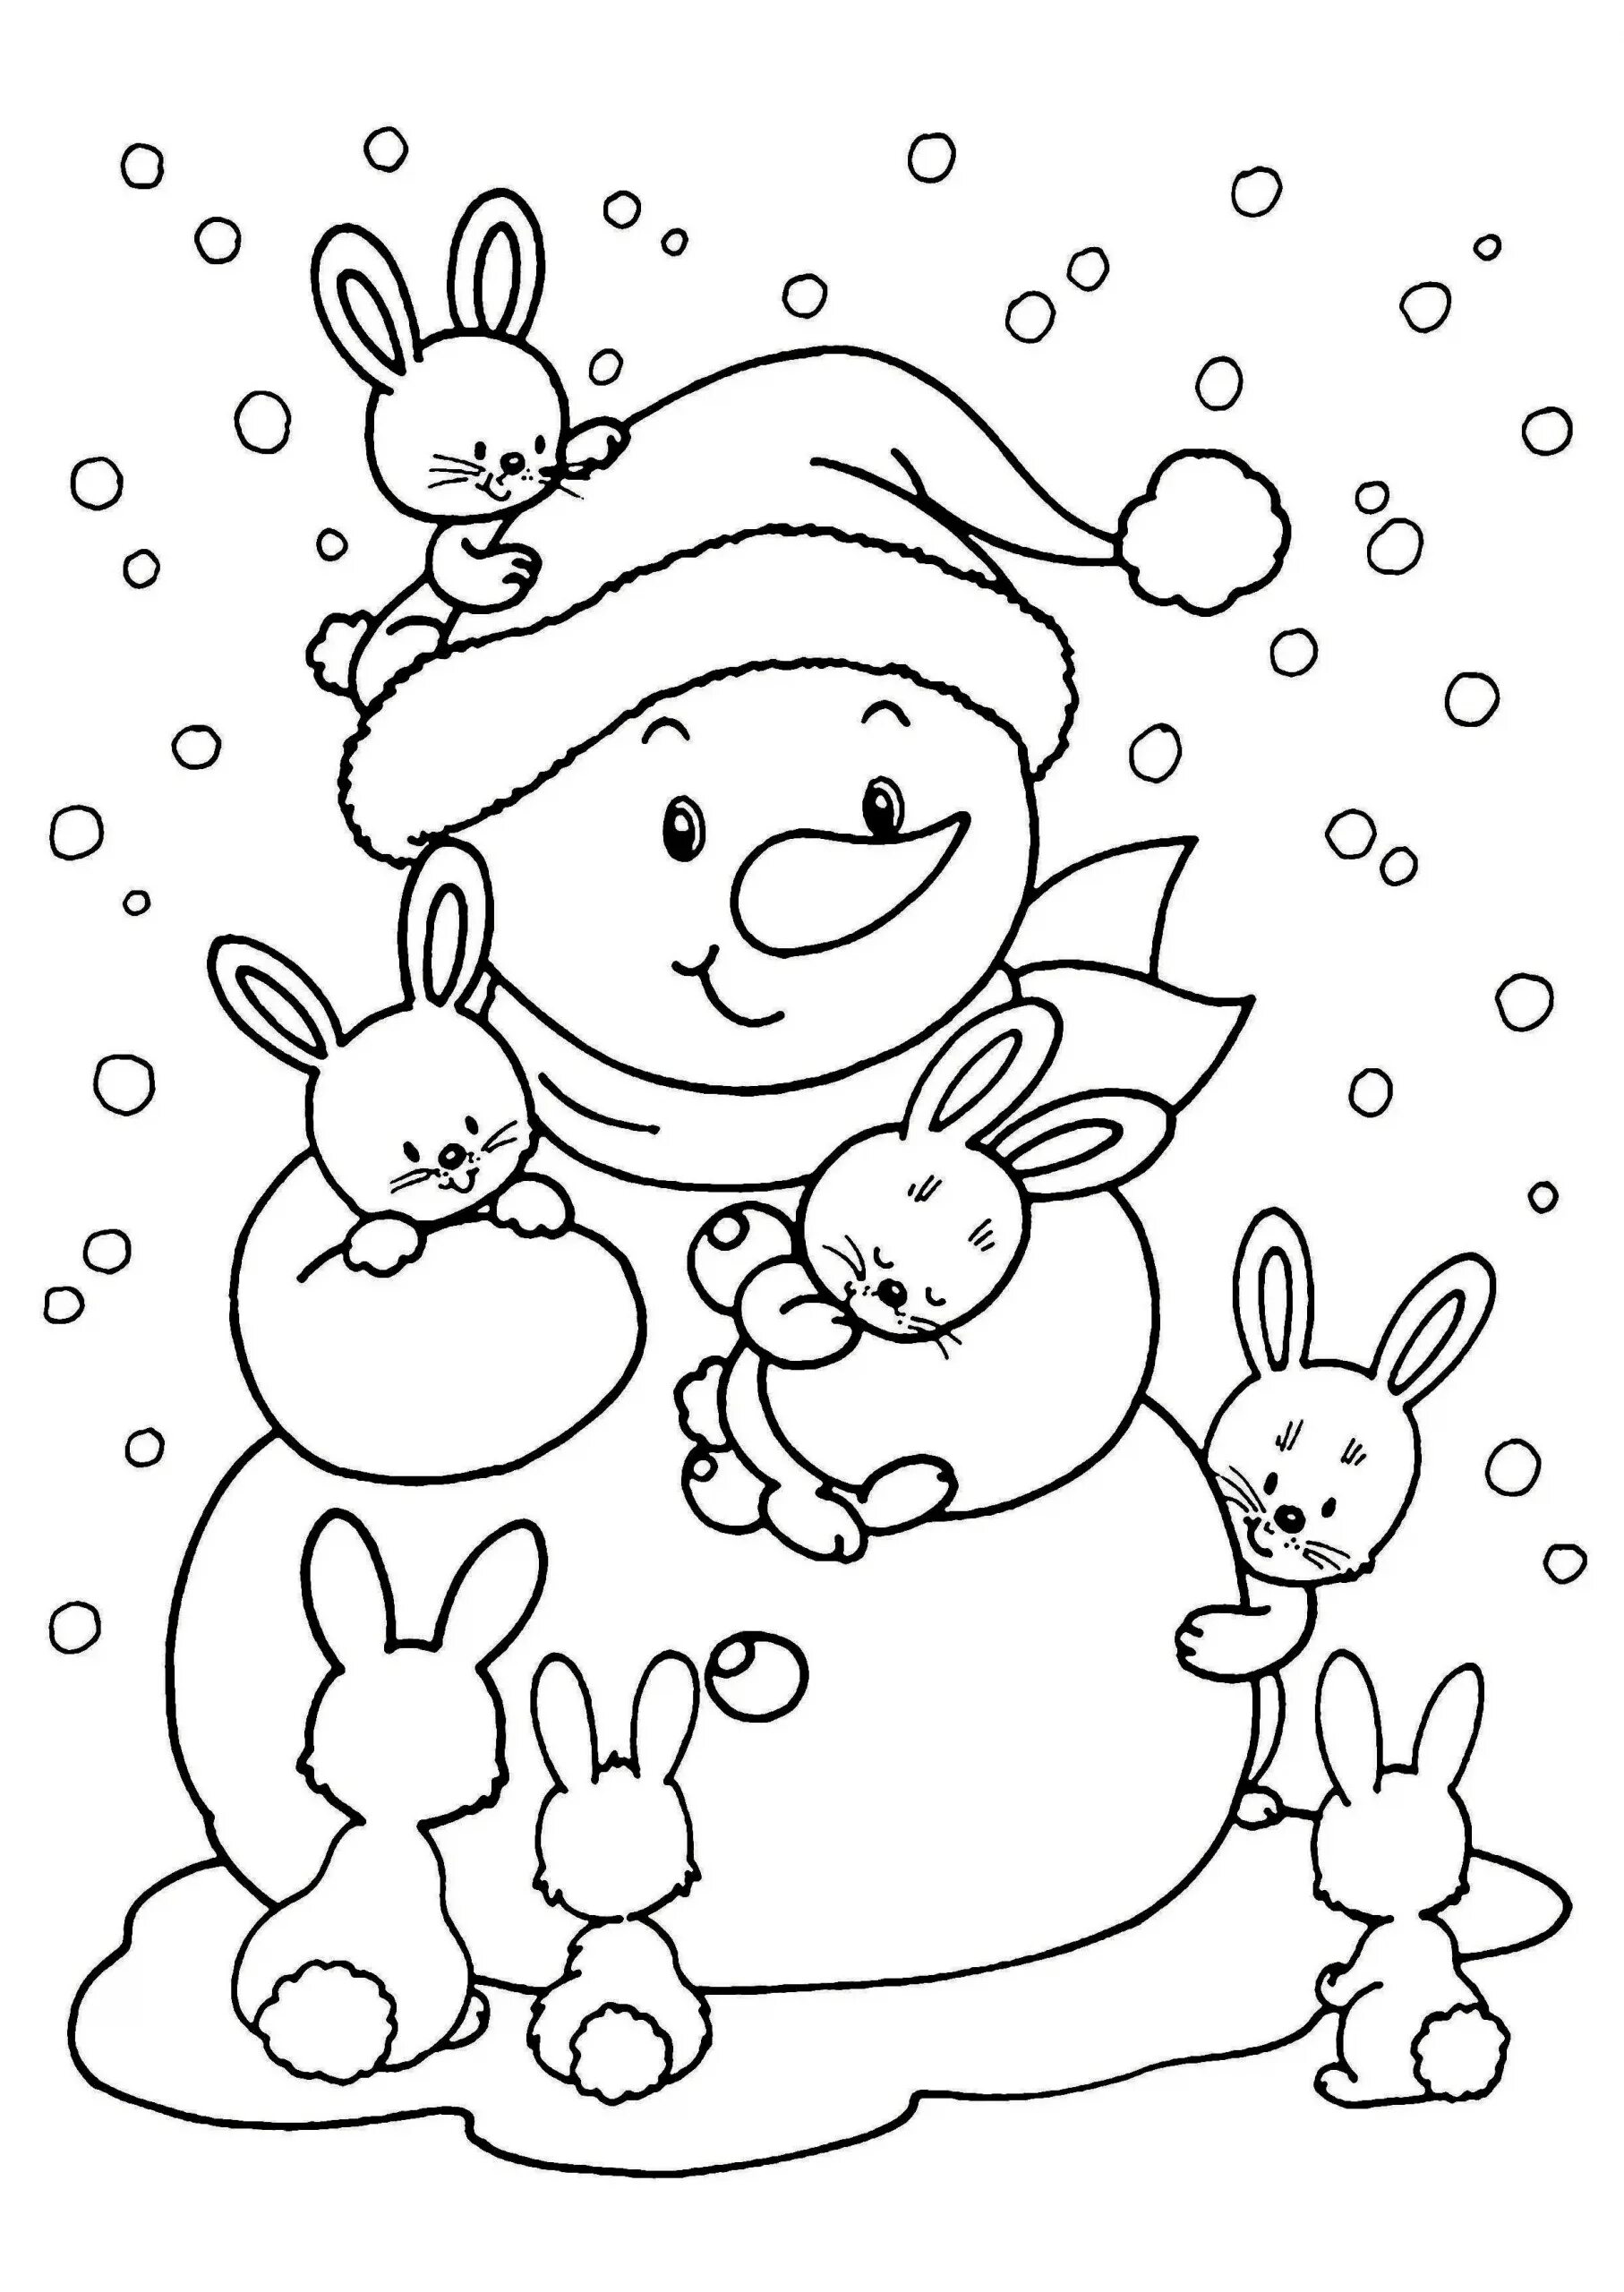 Glowing children's Christmas coloring book